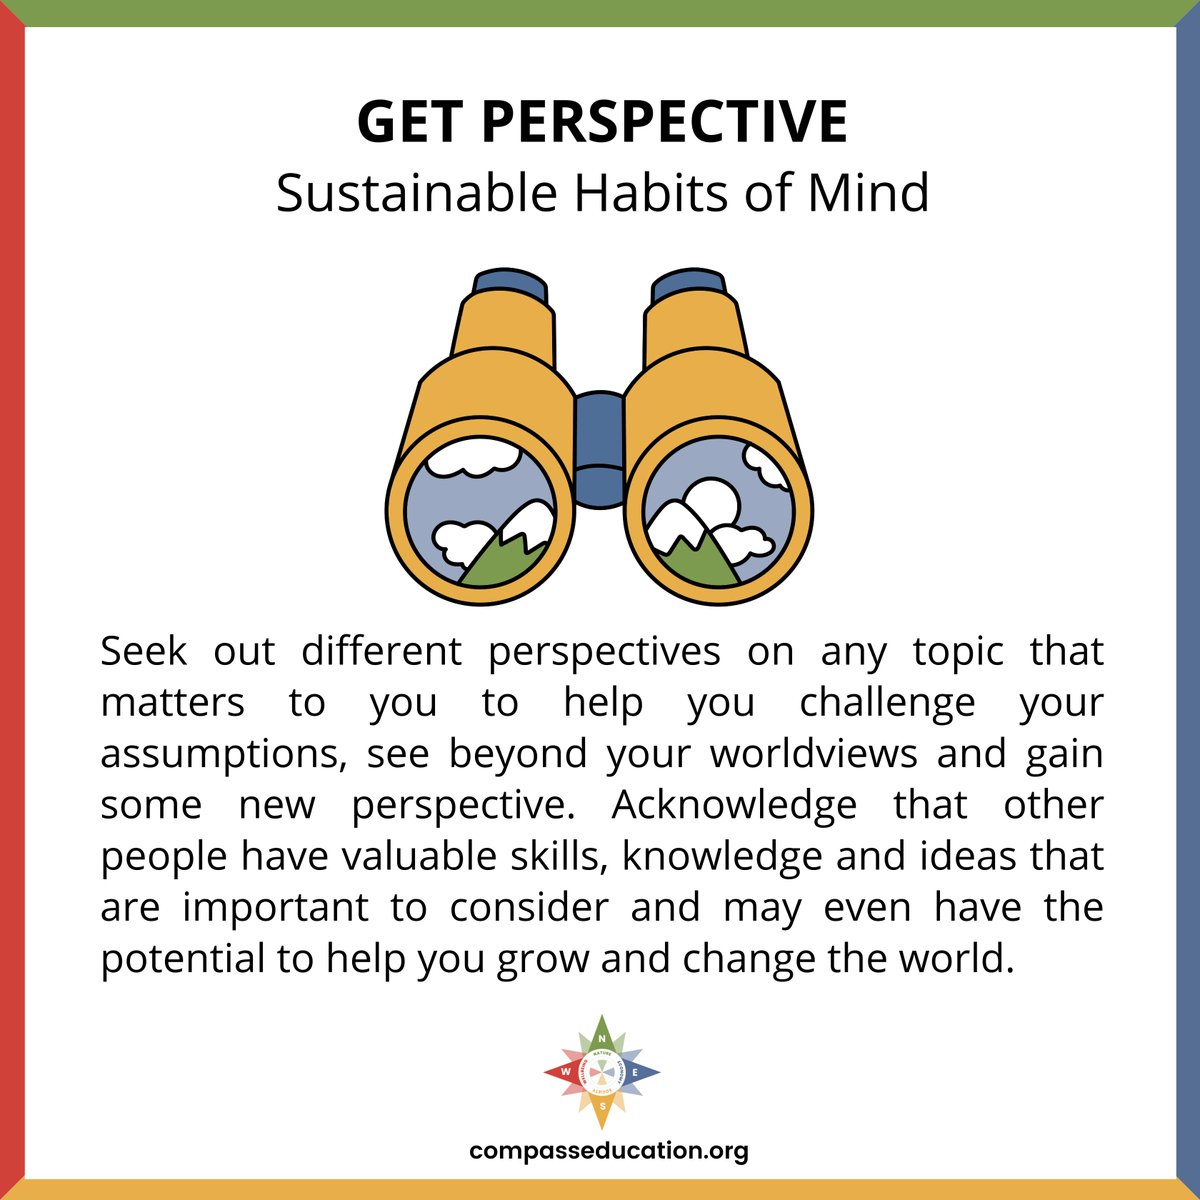 Our goal is to help educators and schools embrace a systemic perspective on sustainability, including human systems promoting sustainable socioeconomic thriving. Explore diverse viewpoints and embrace fresh insights. #SustainabilityEducation #sustainabilitytips #SystemsThinking